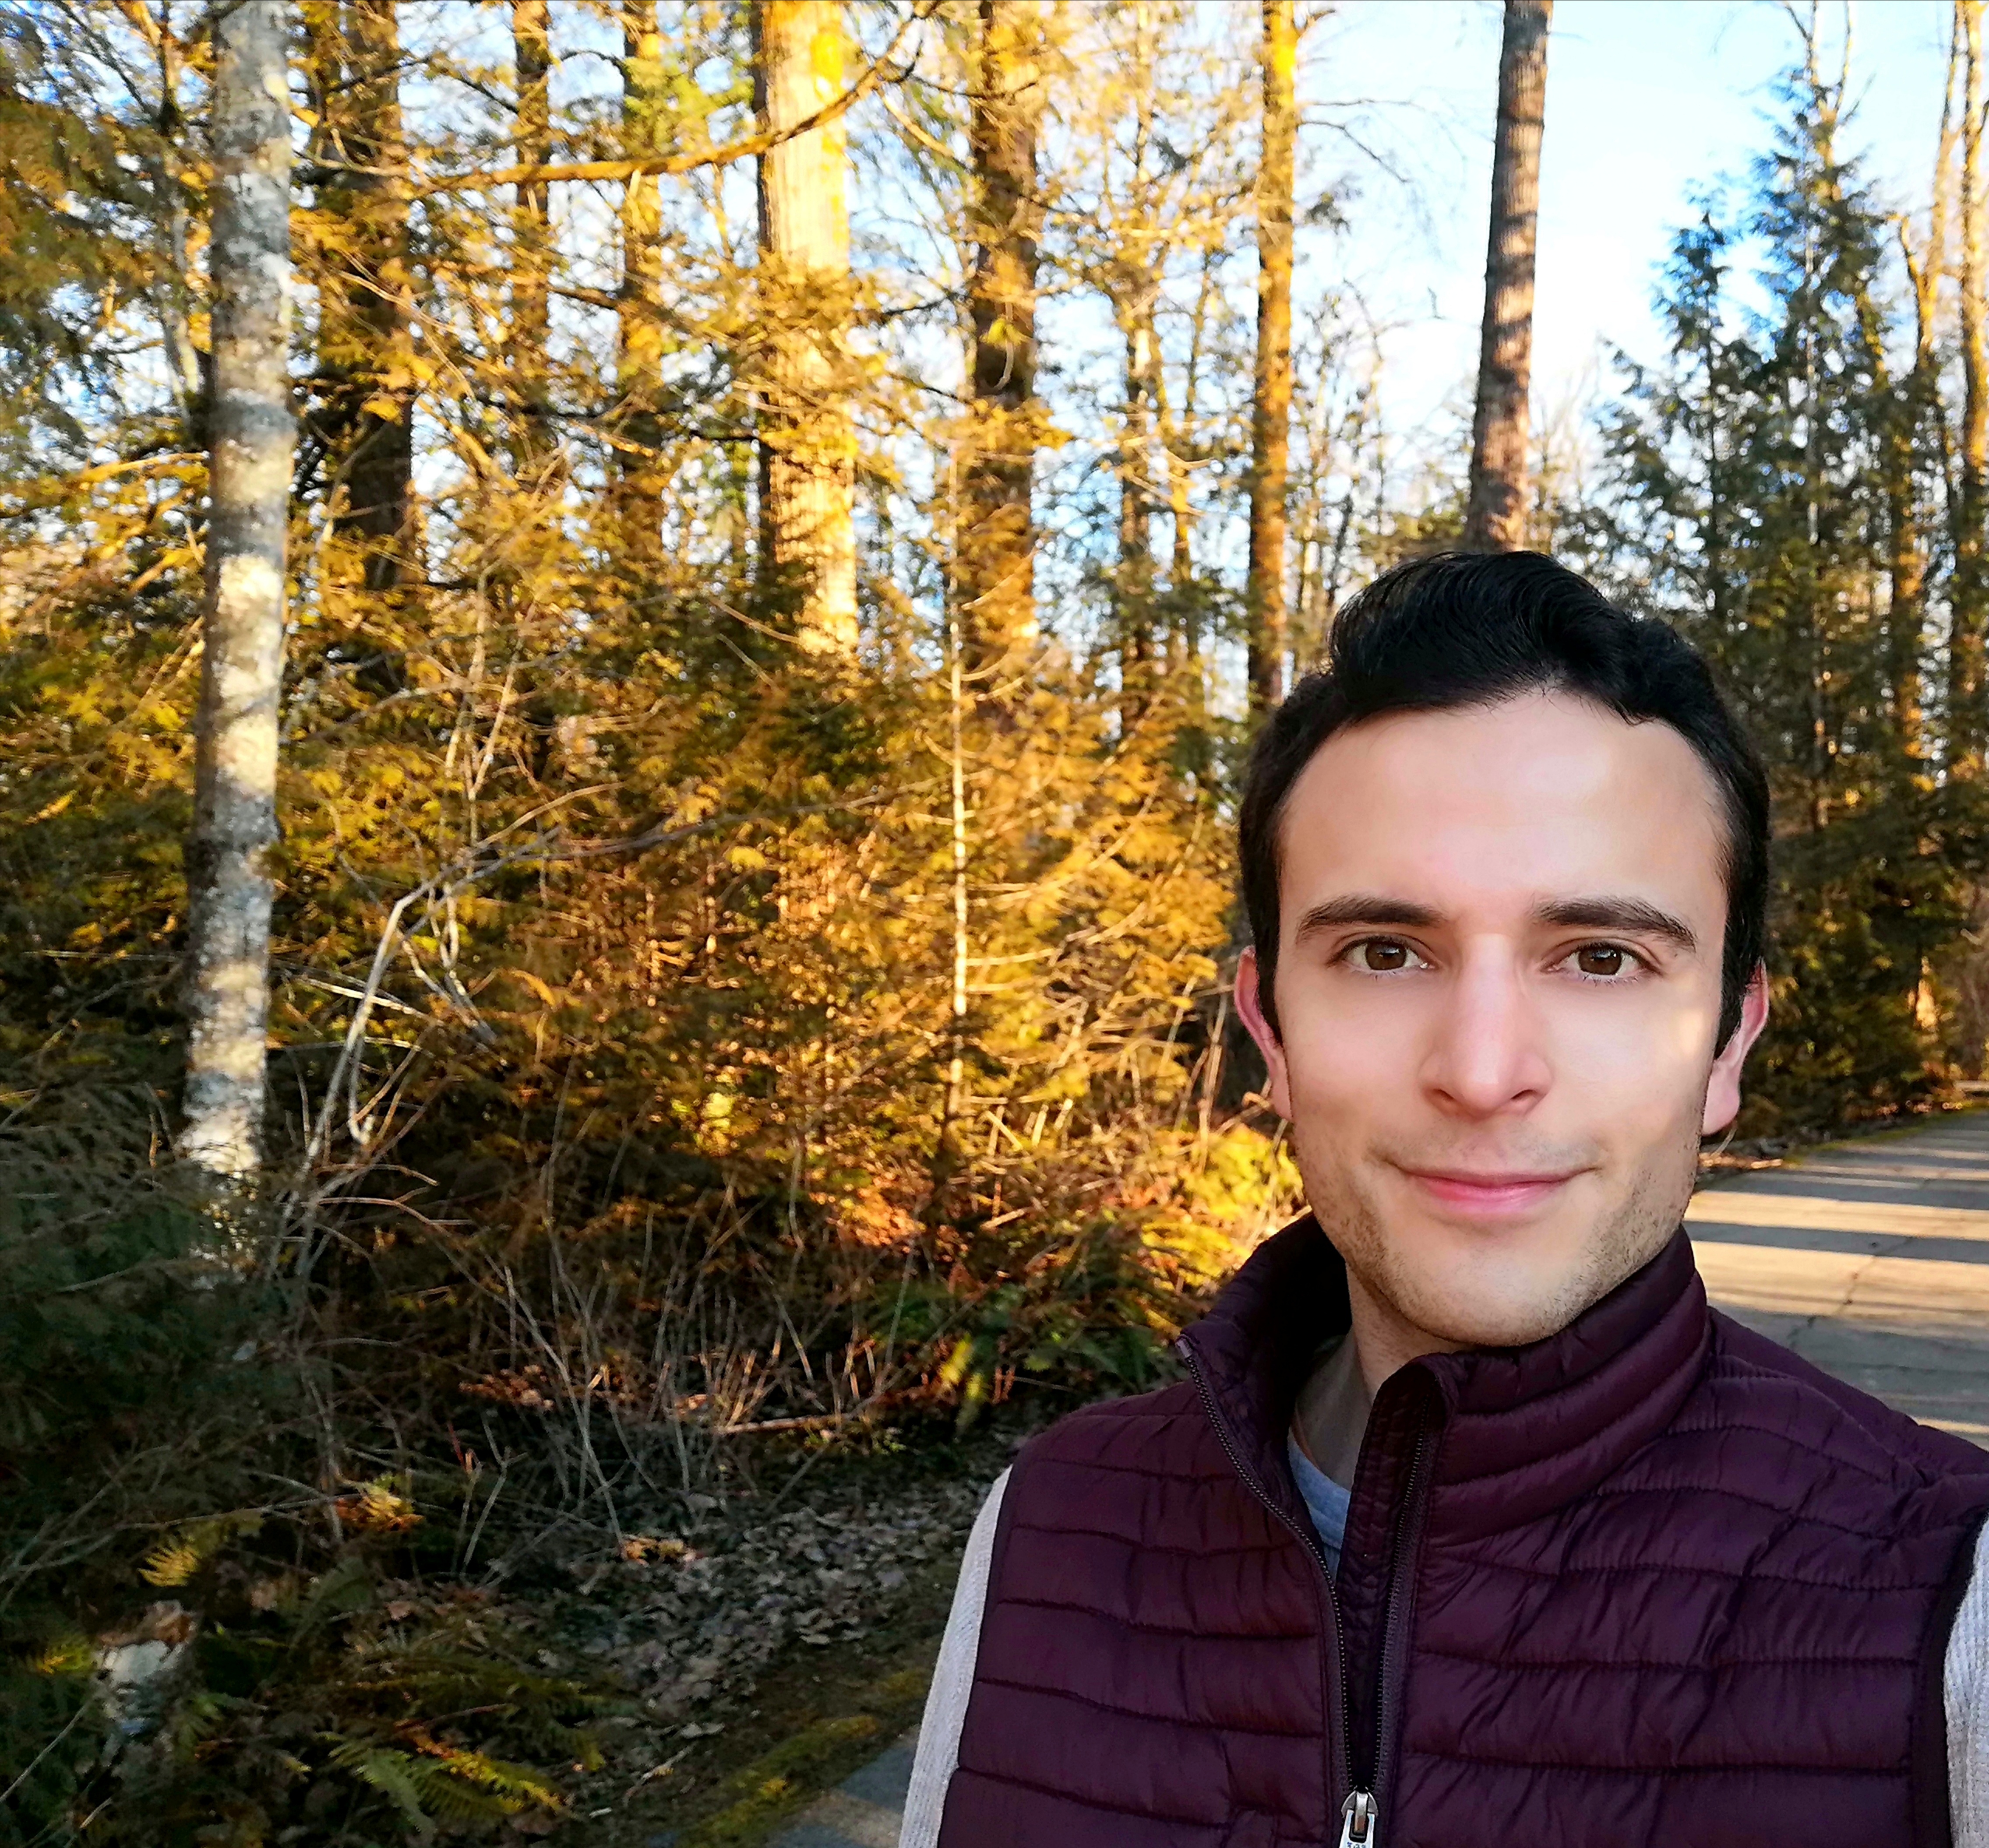 Student standing in a forest pathway wearing puffy vest in sunny afternoon weather.